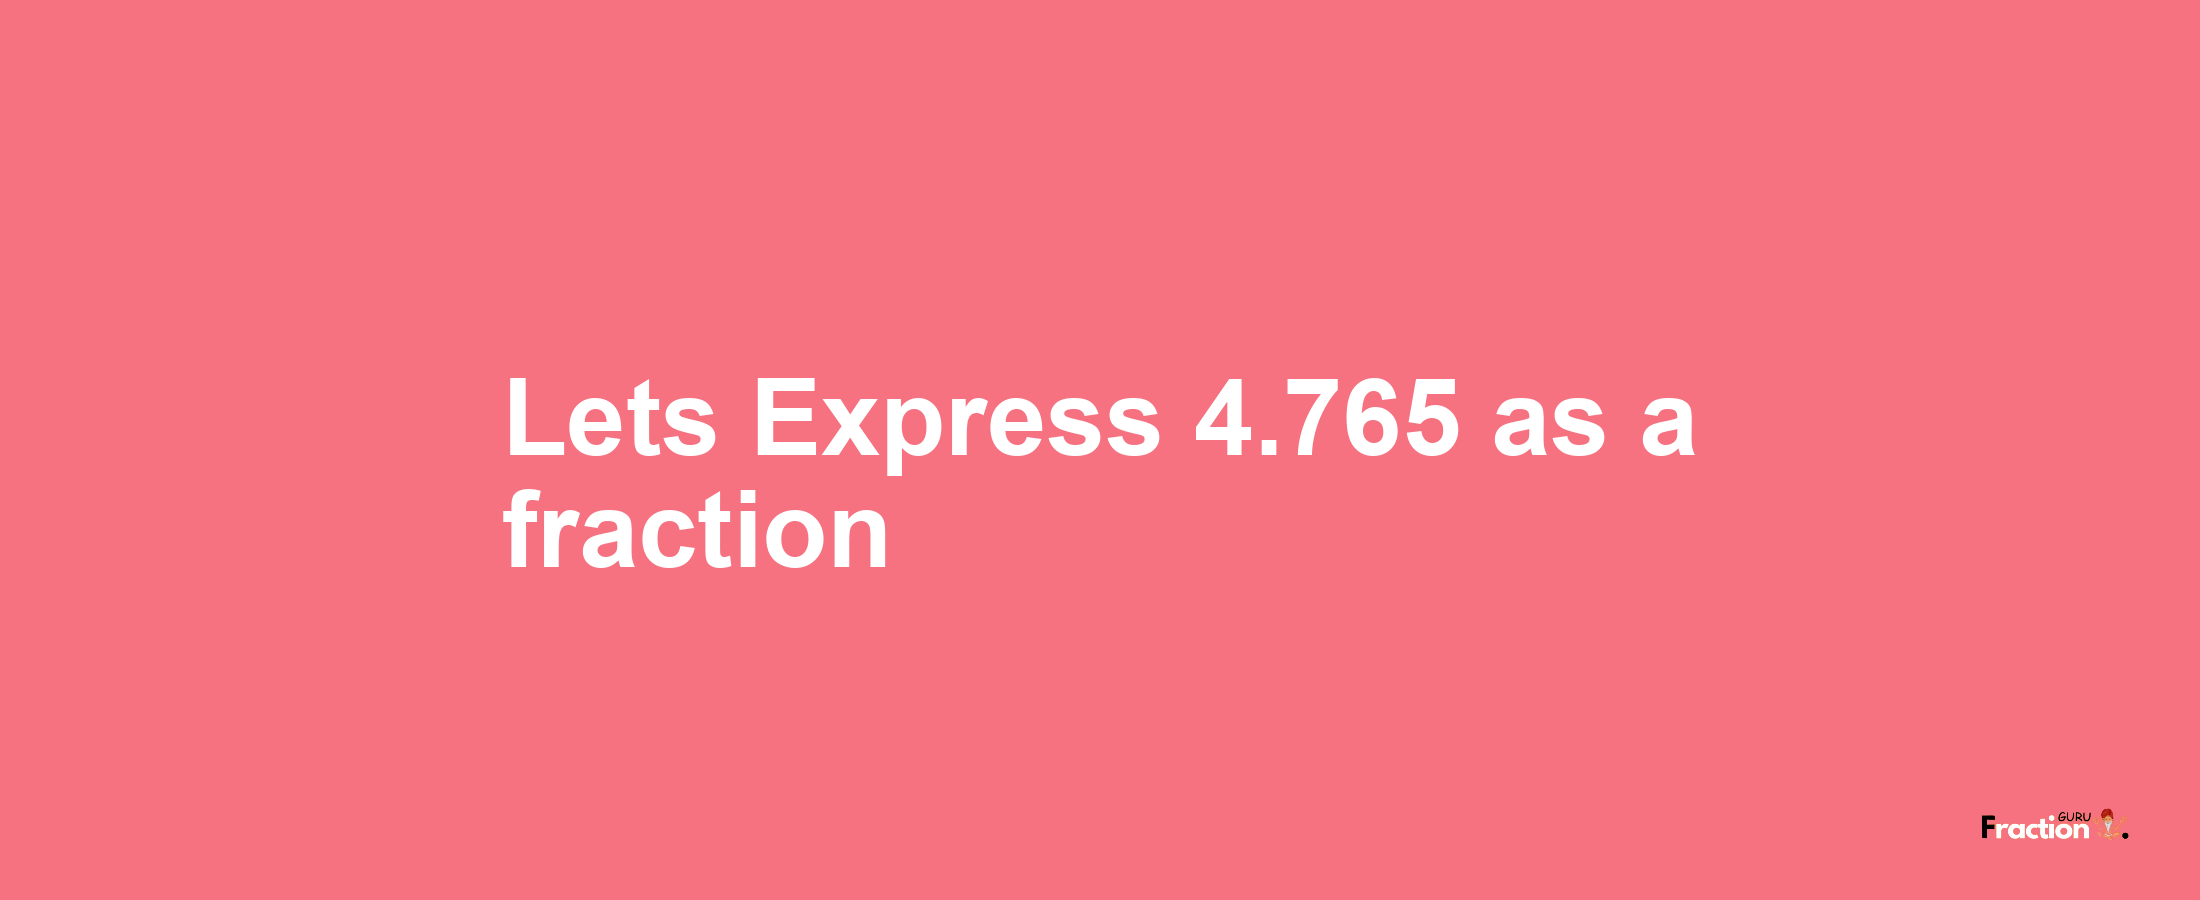 Lets Express 4.765 as afraction